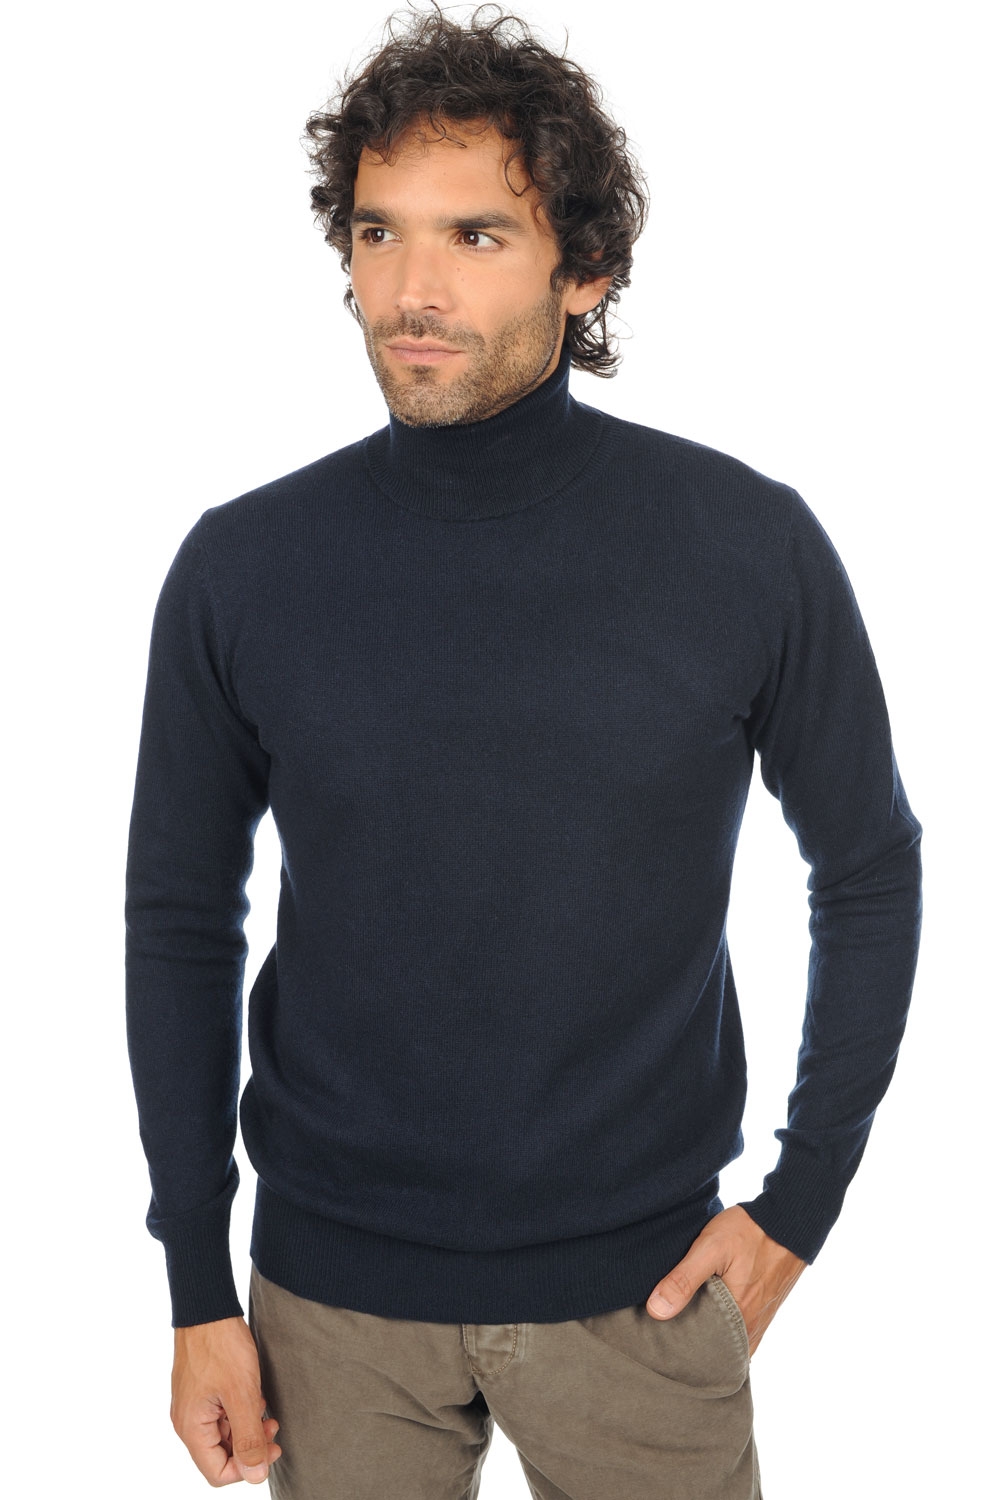 Cashmere men low prices tarry first dress blue m